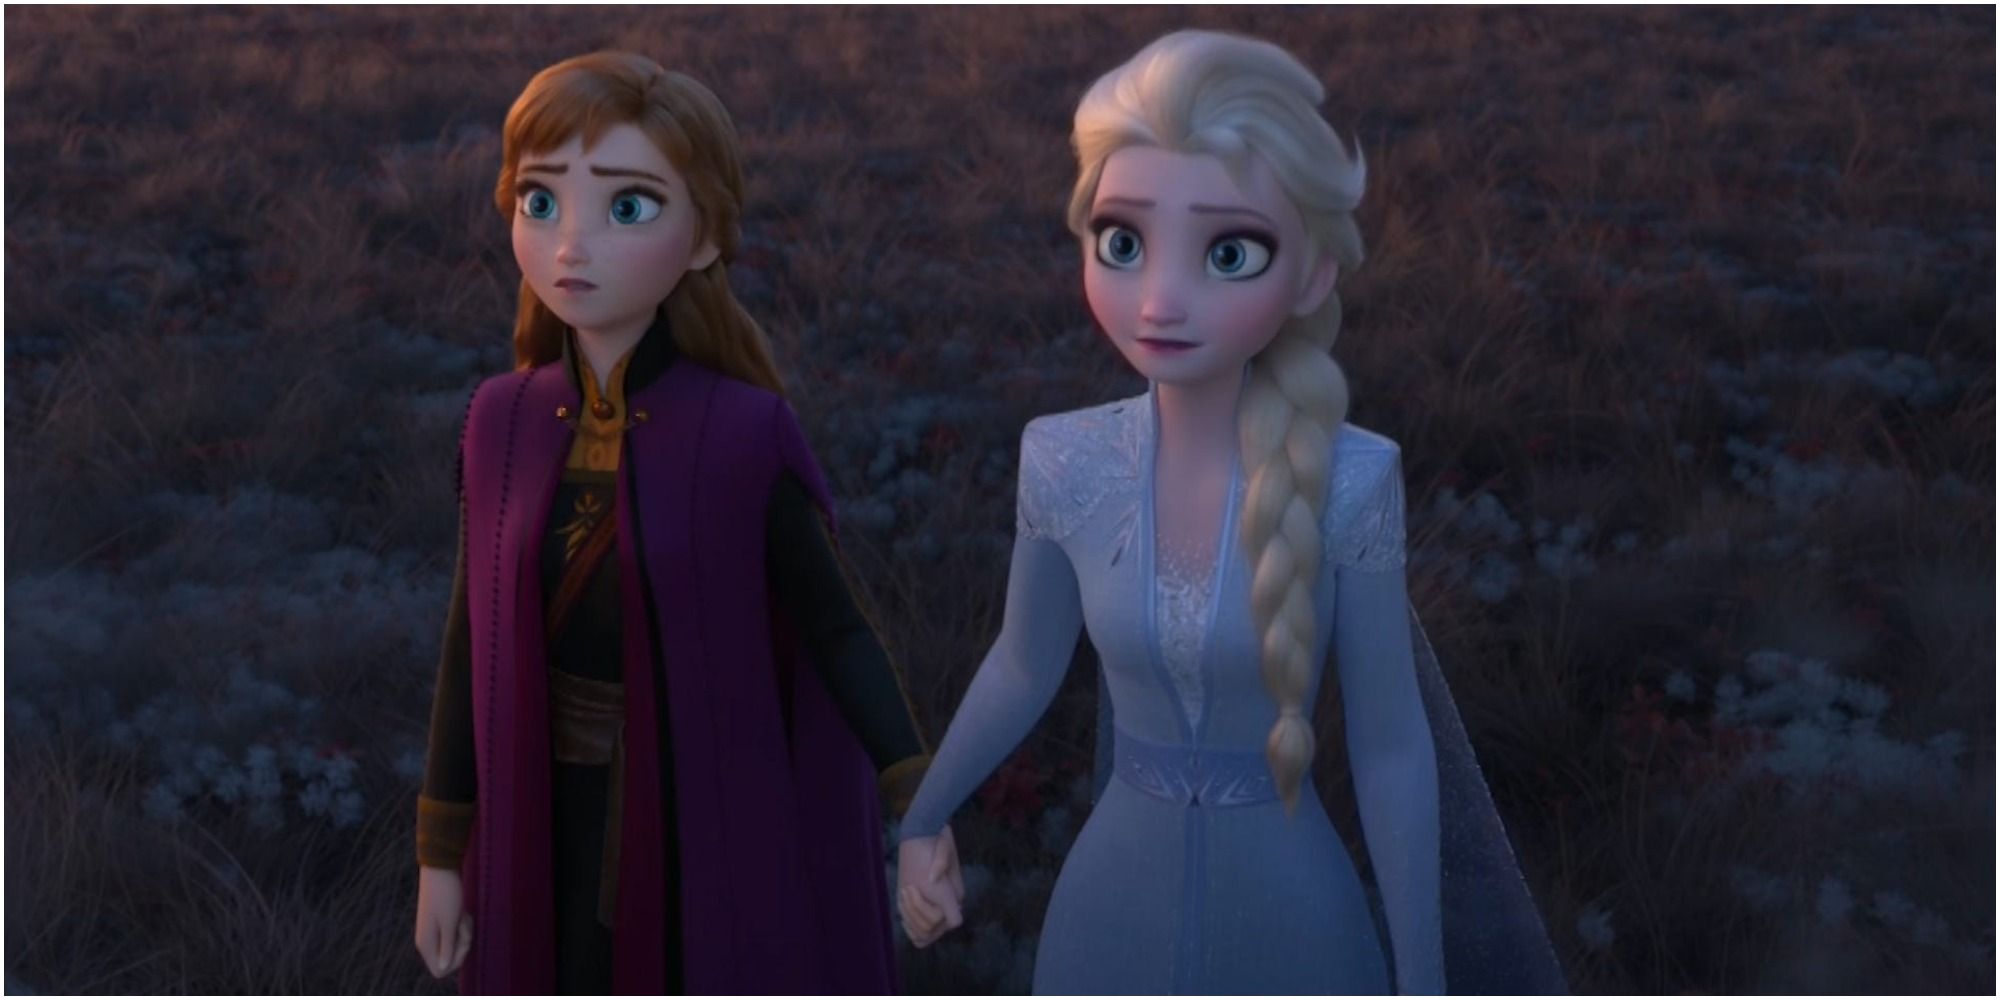 What makes you different makes you powerful — Elsa and Anna in